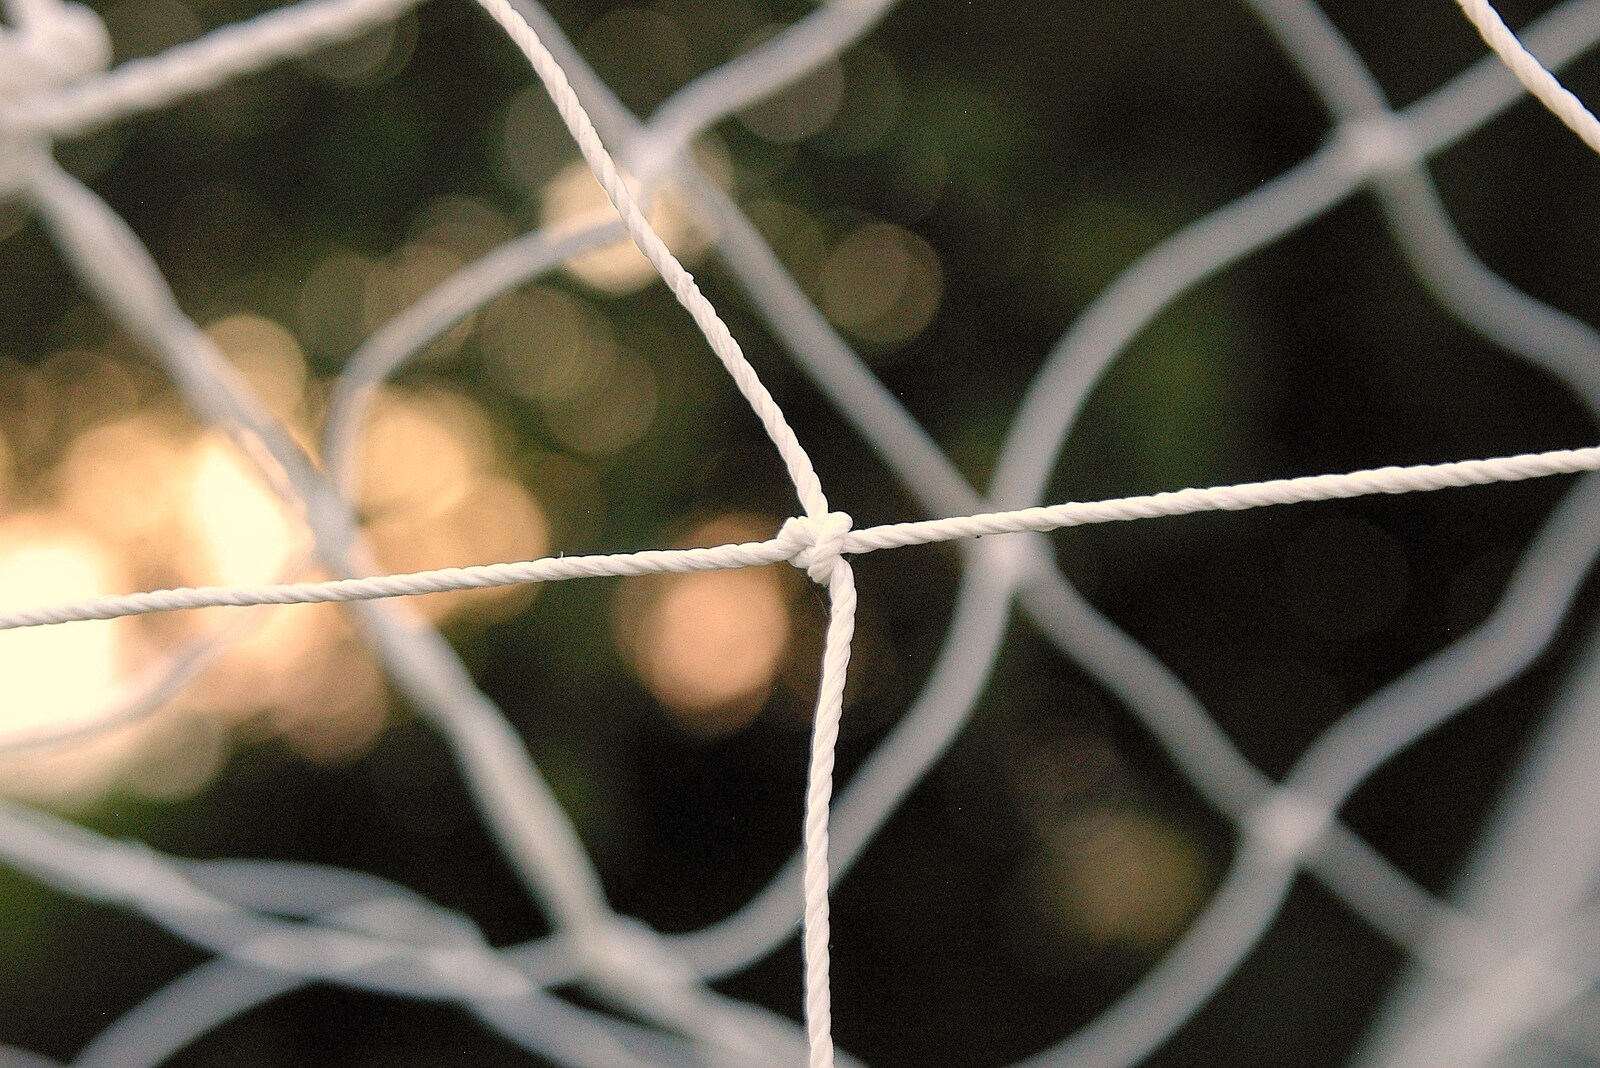 A close-up of some football netting from The BBs Play Athelington Hall, Horham, Suffolk - 29th June 2006